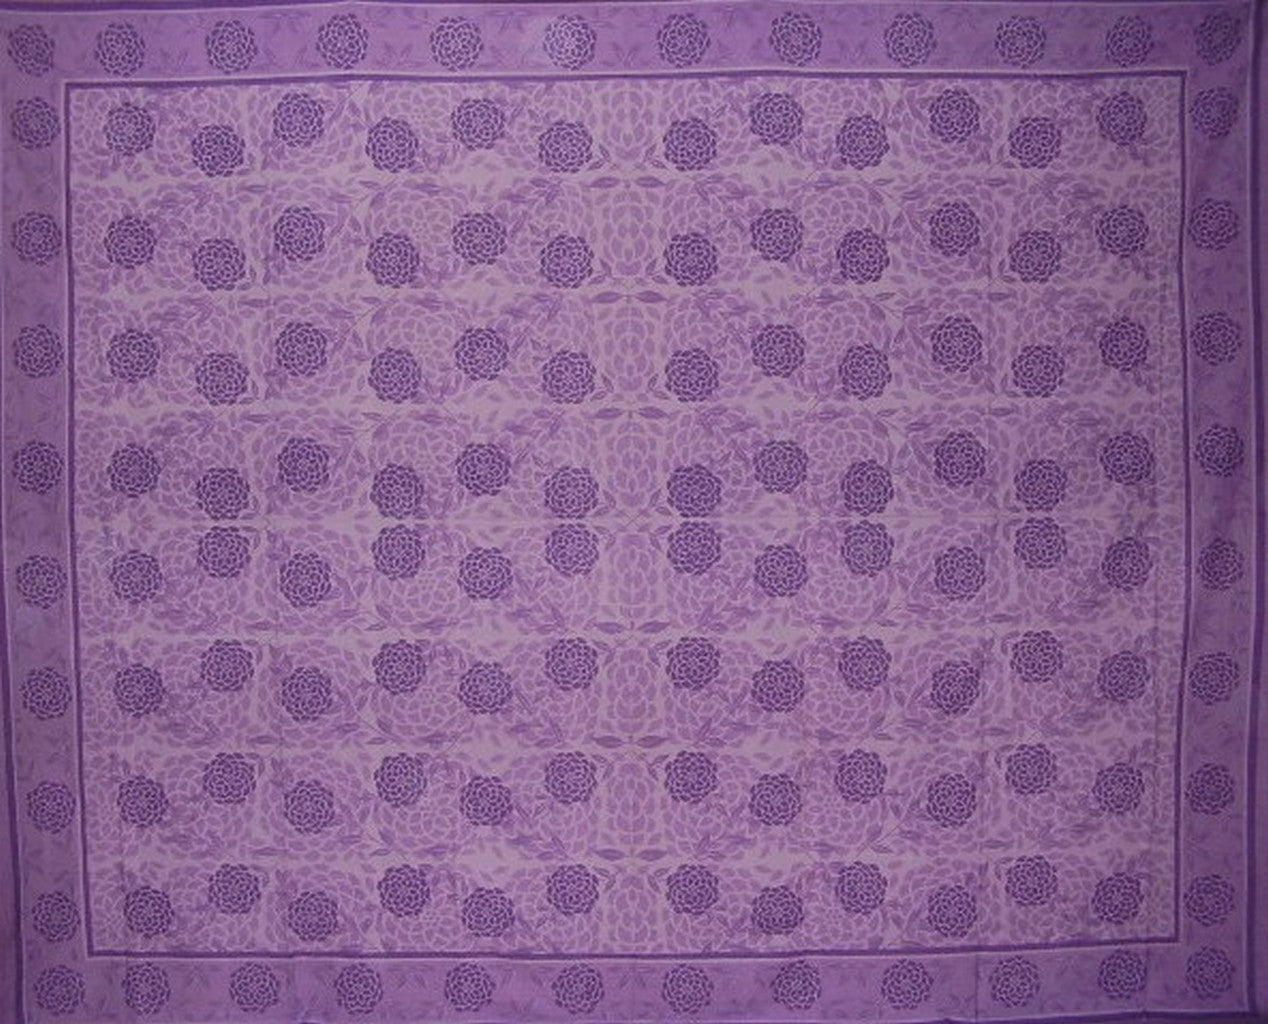 Blooming Floral Tapestry Cotton Bedspread 108" x 88" Full-Queen Purple